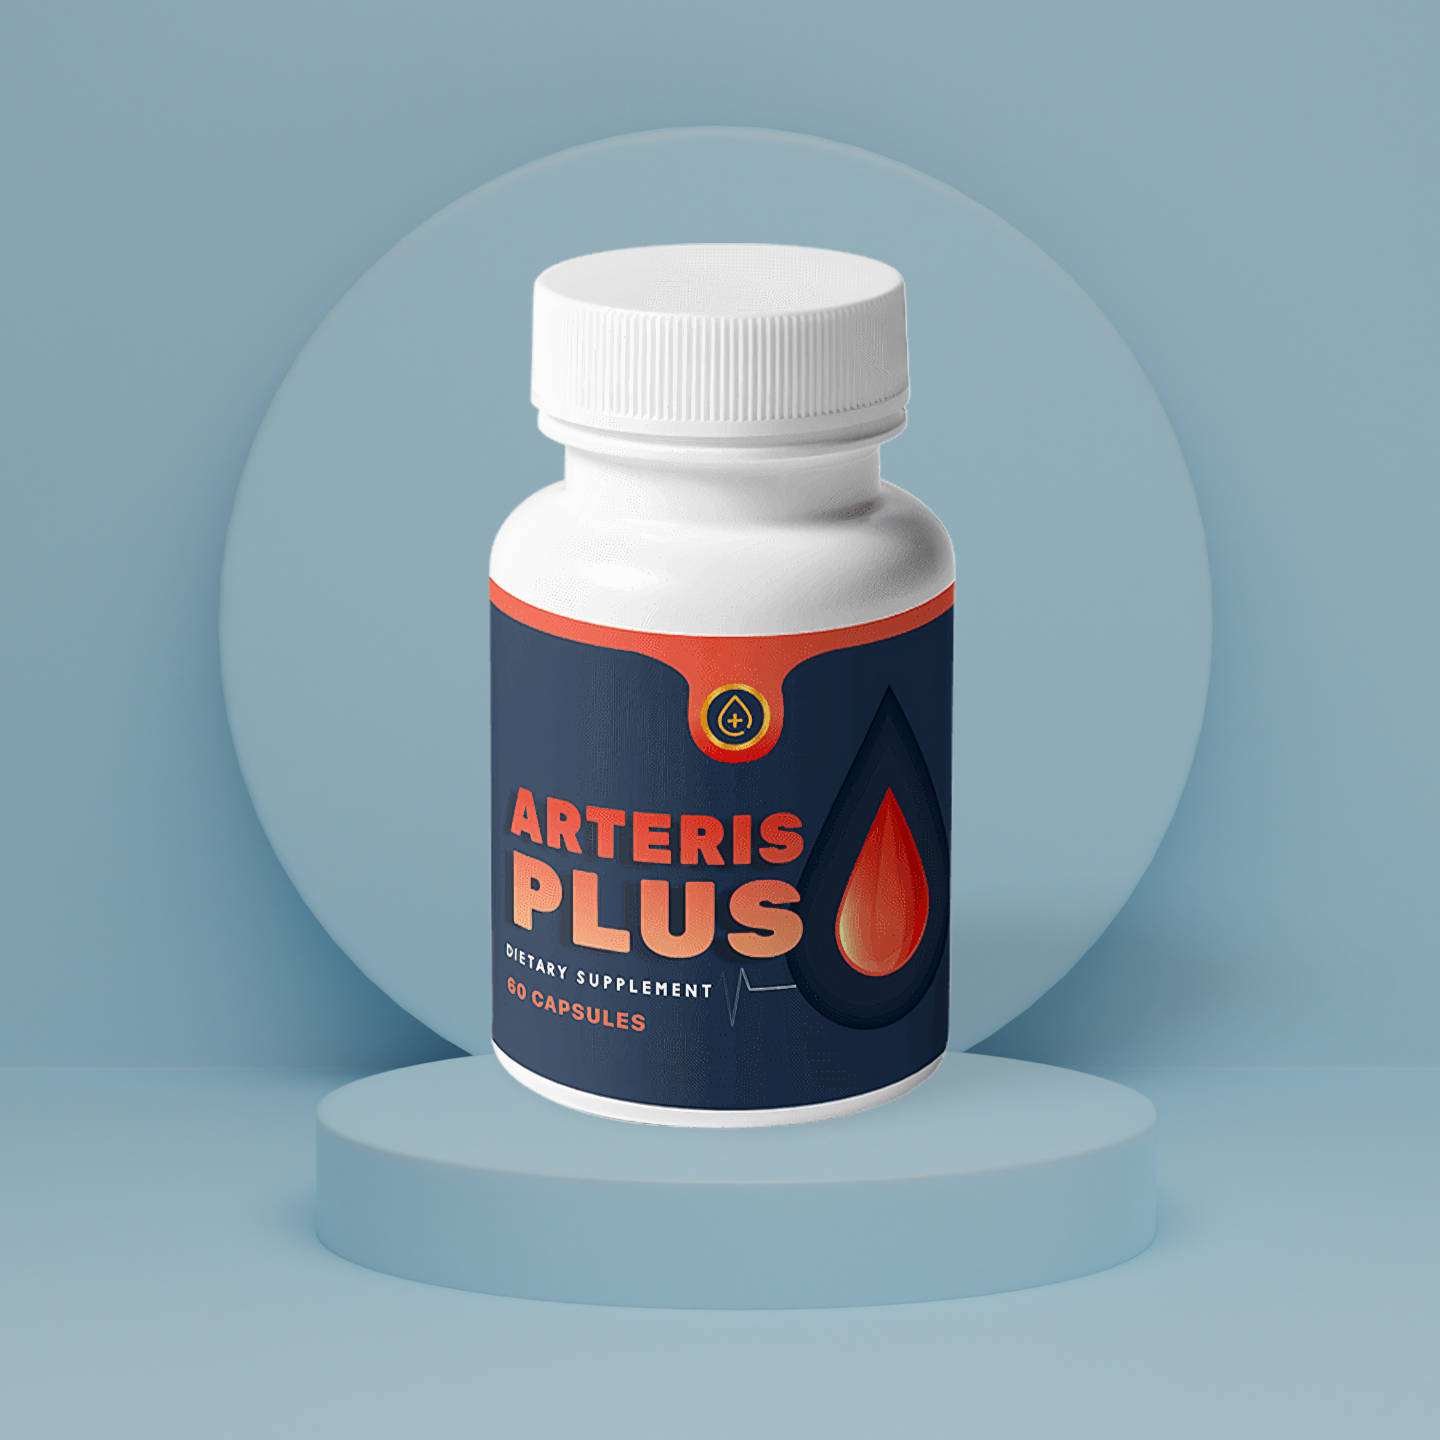 Arteris Plus Reviews: Real Heart Health Boost? The Truth About This Supplement!